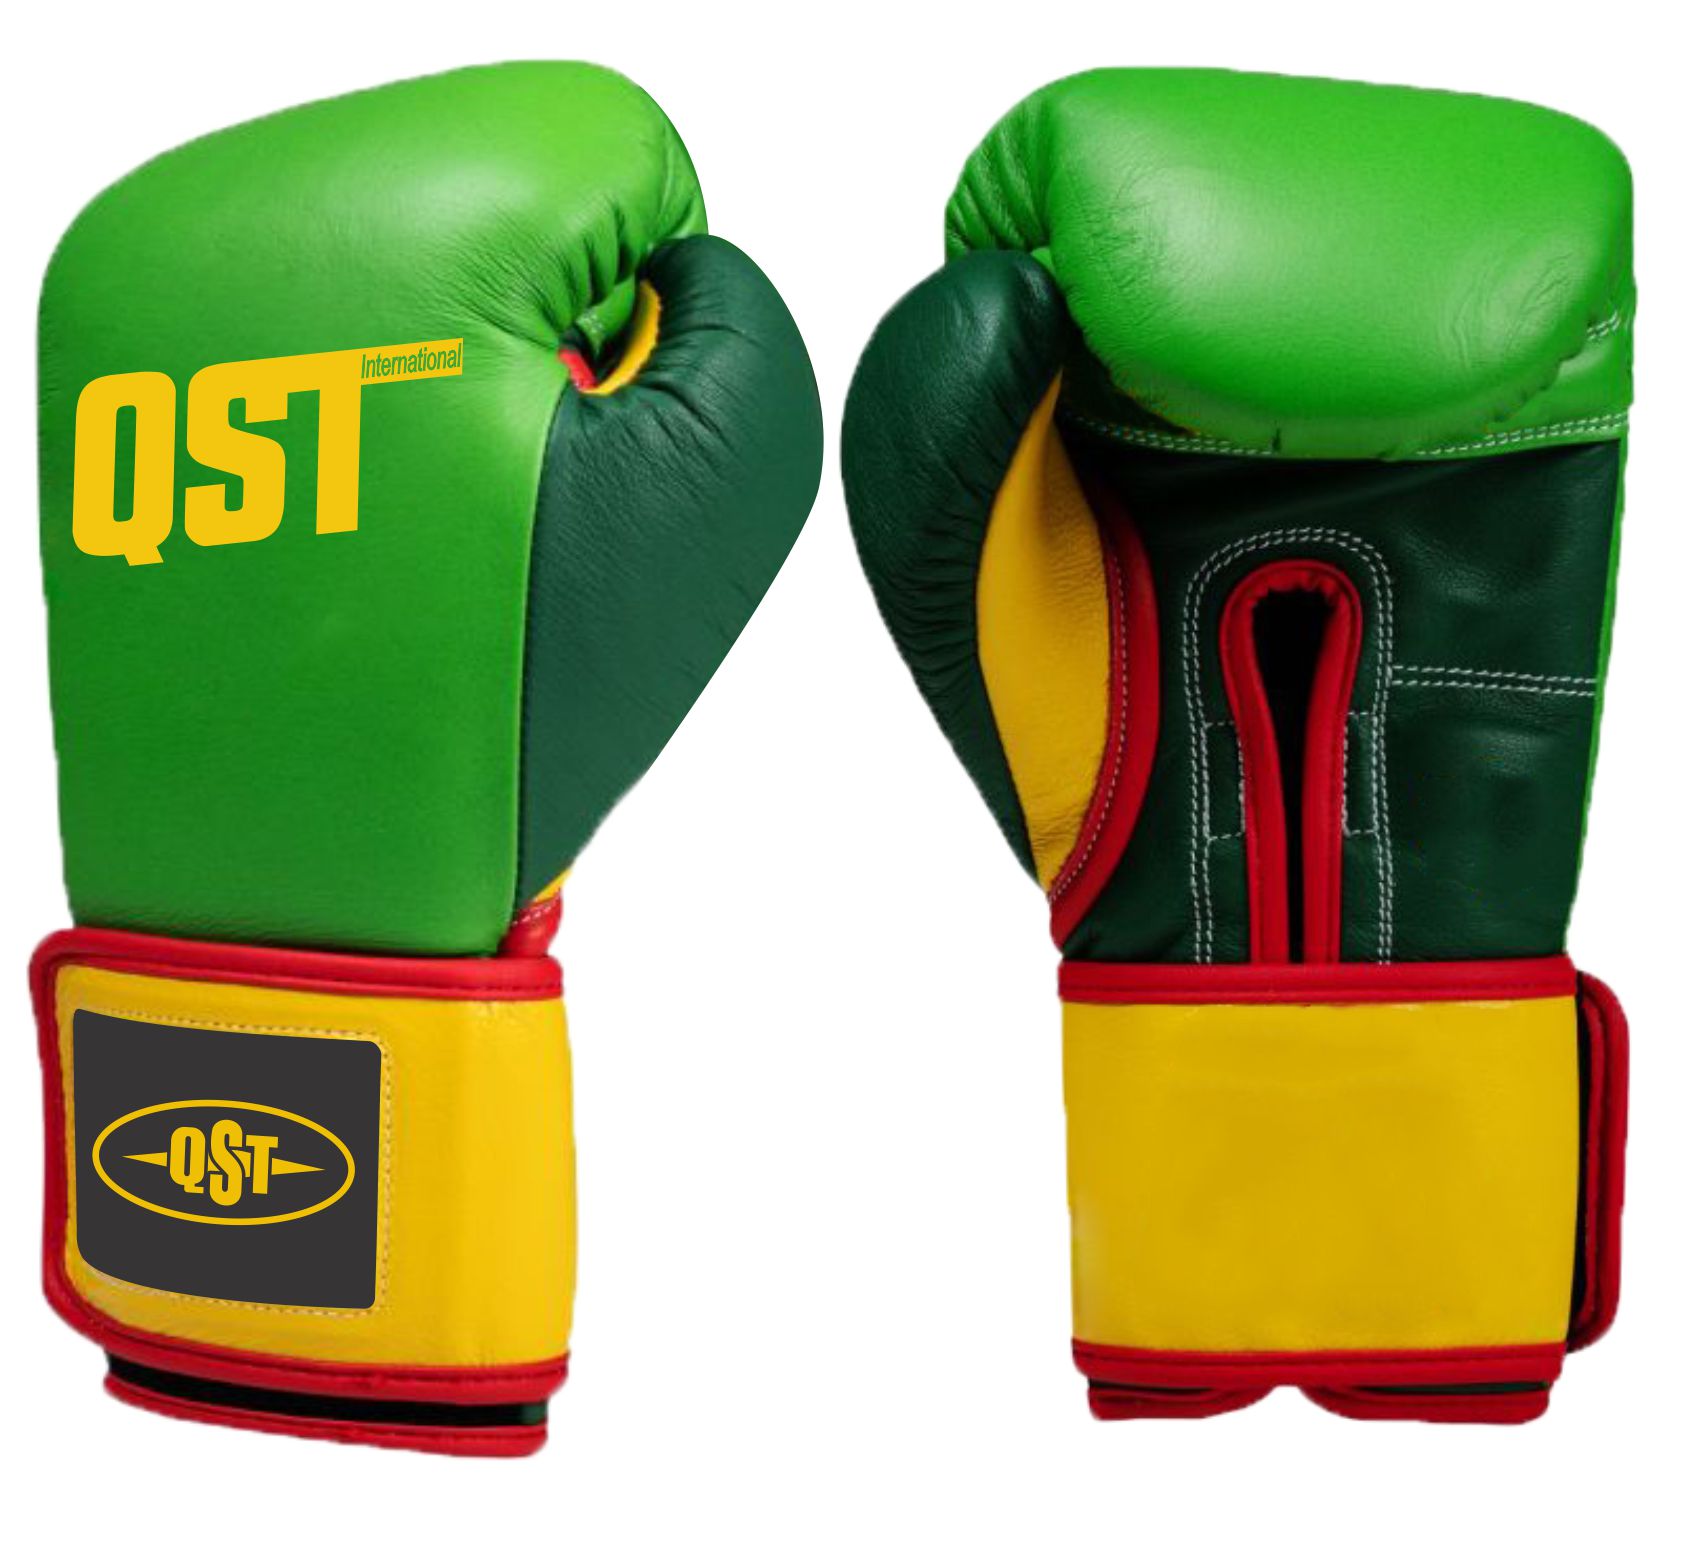 Professional Boxing Gloves - PRG-1500